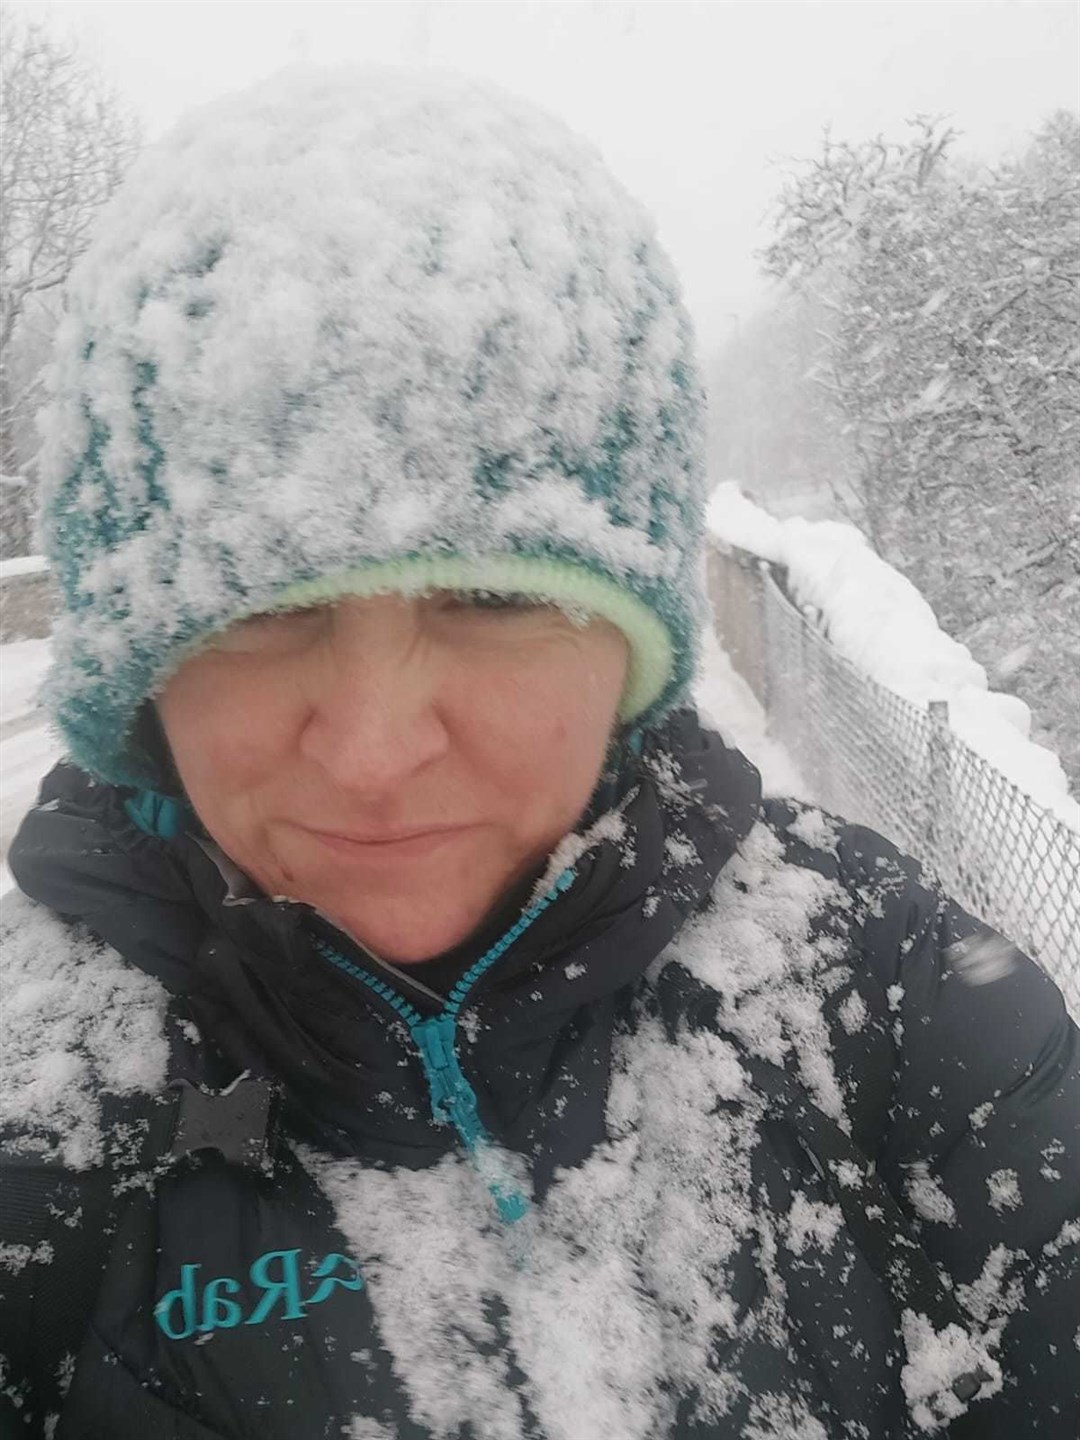 NHS Highland community nurse battling the severe weather conditions. Picture: NHS Highland Facebook.